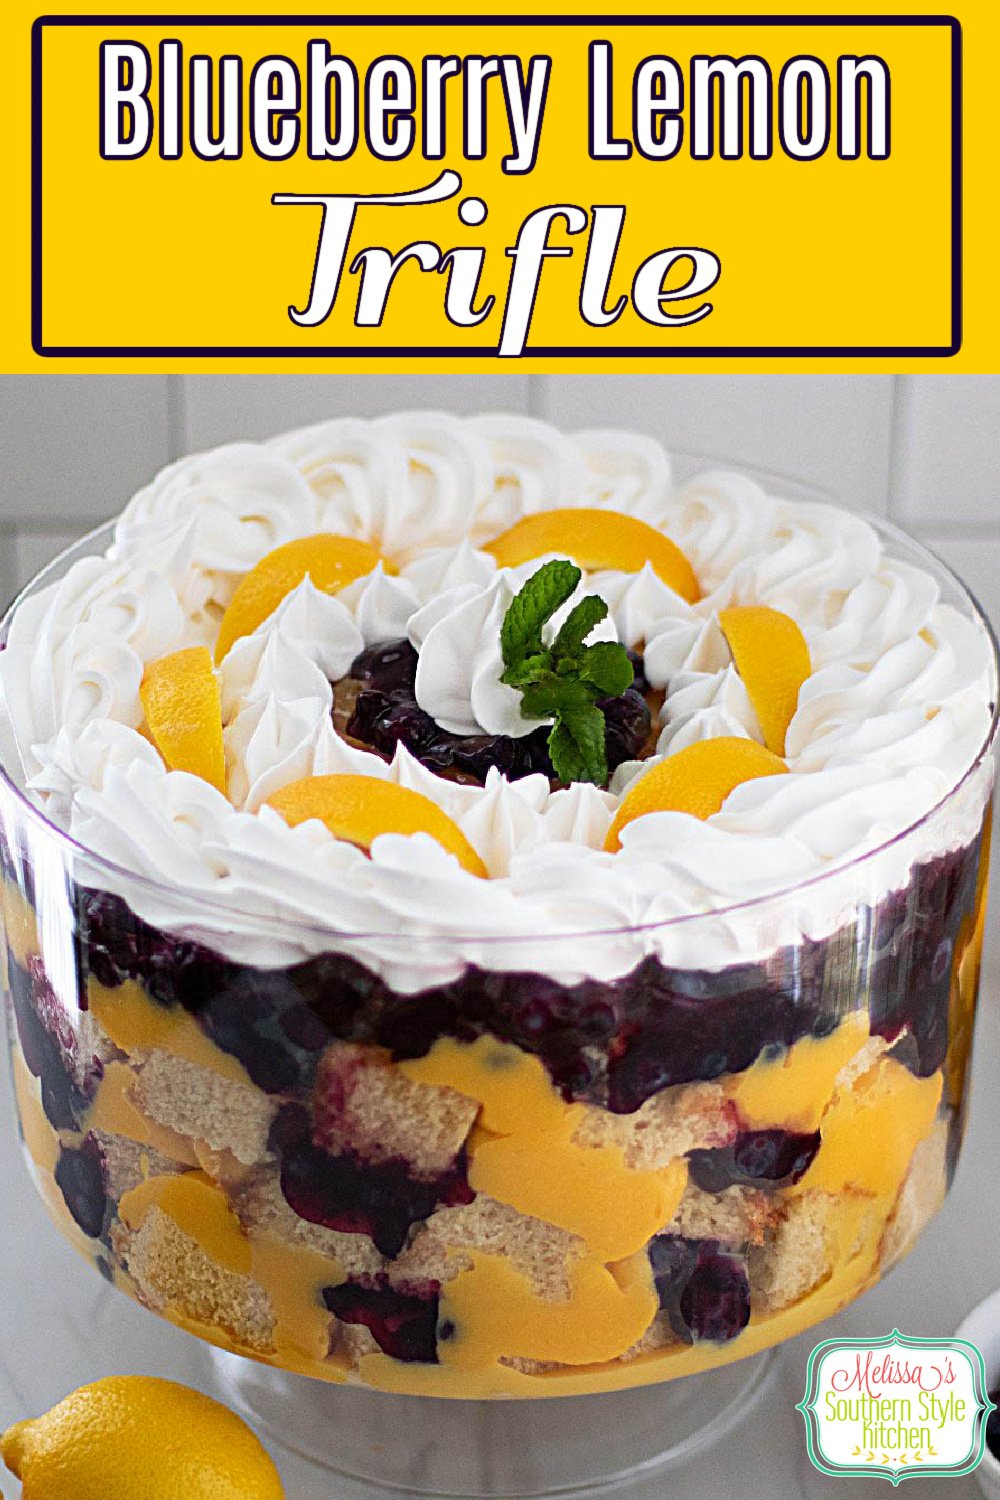 This stunning Blueberry Lemon Trifle recipe is an edible centerpiece guaranteed to add height and beauty to the dessert table #blueberrylemontrifle #lemontriflerecipe #bestlemontriflerecipe #blueberries #lemondesserts #poundcaketrifle via @melissasssk